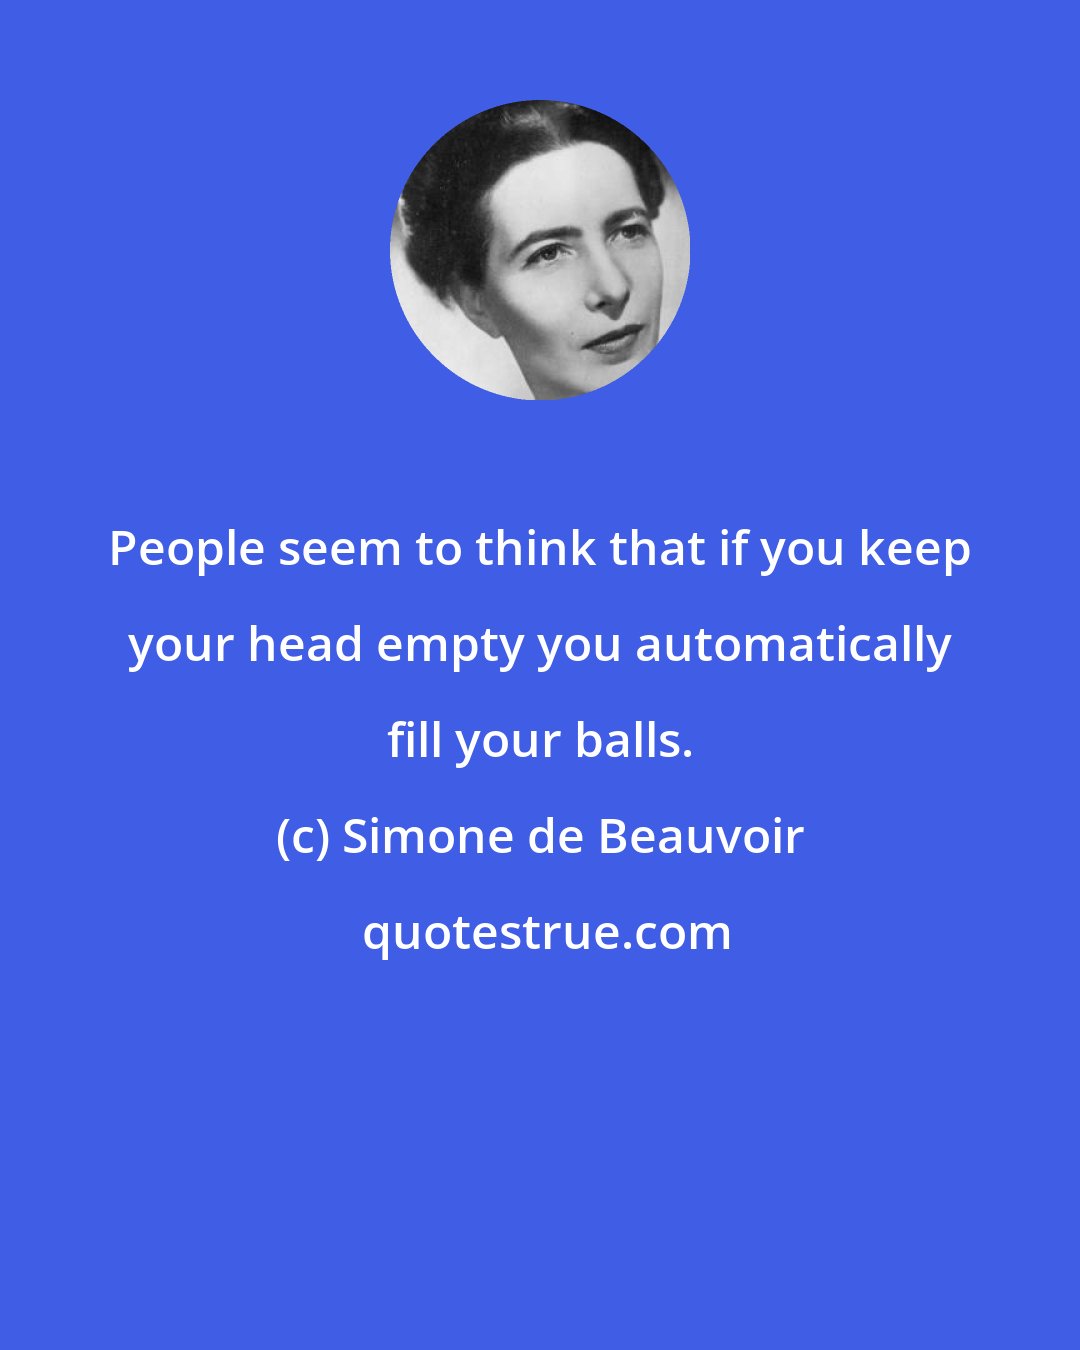 Simone de Beauvoir: People seem to think that if you keep your head empty you automatically fill your balls.